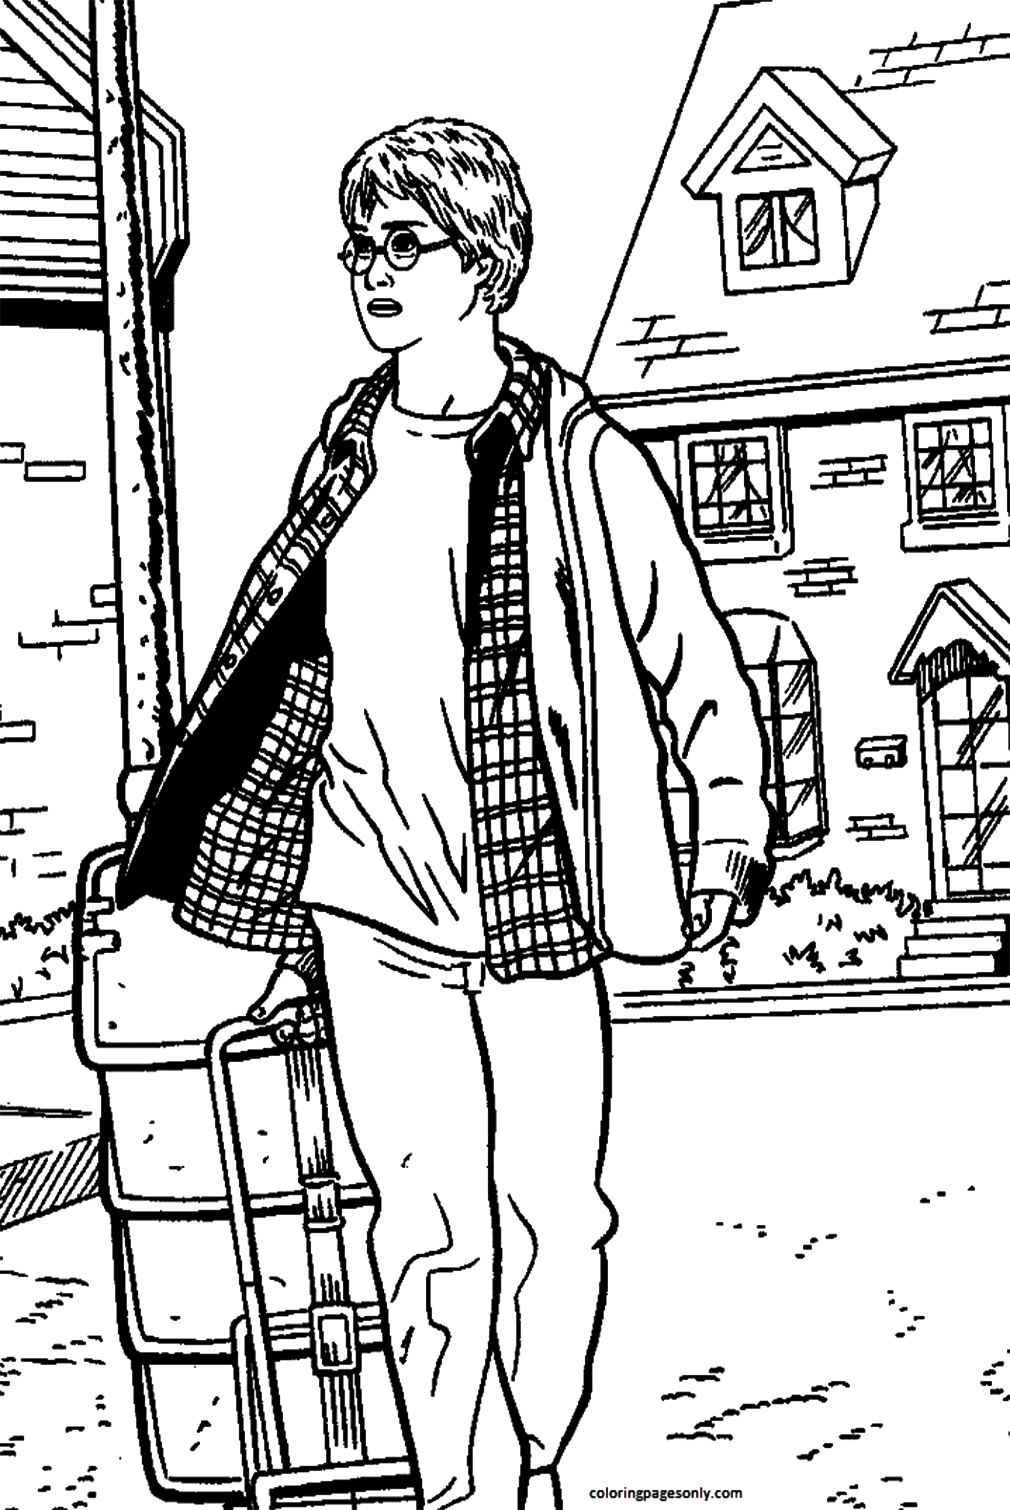 Harry and Luggage Bag Coloring Pages